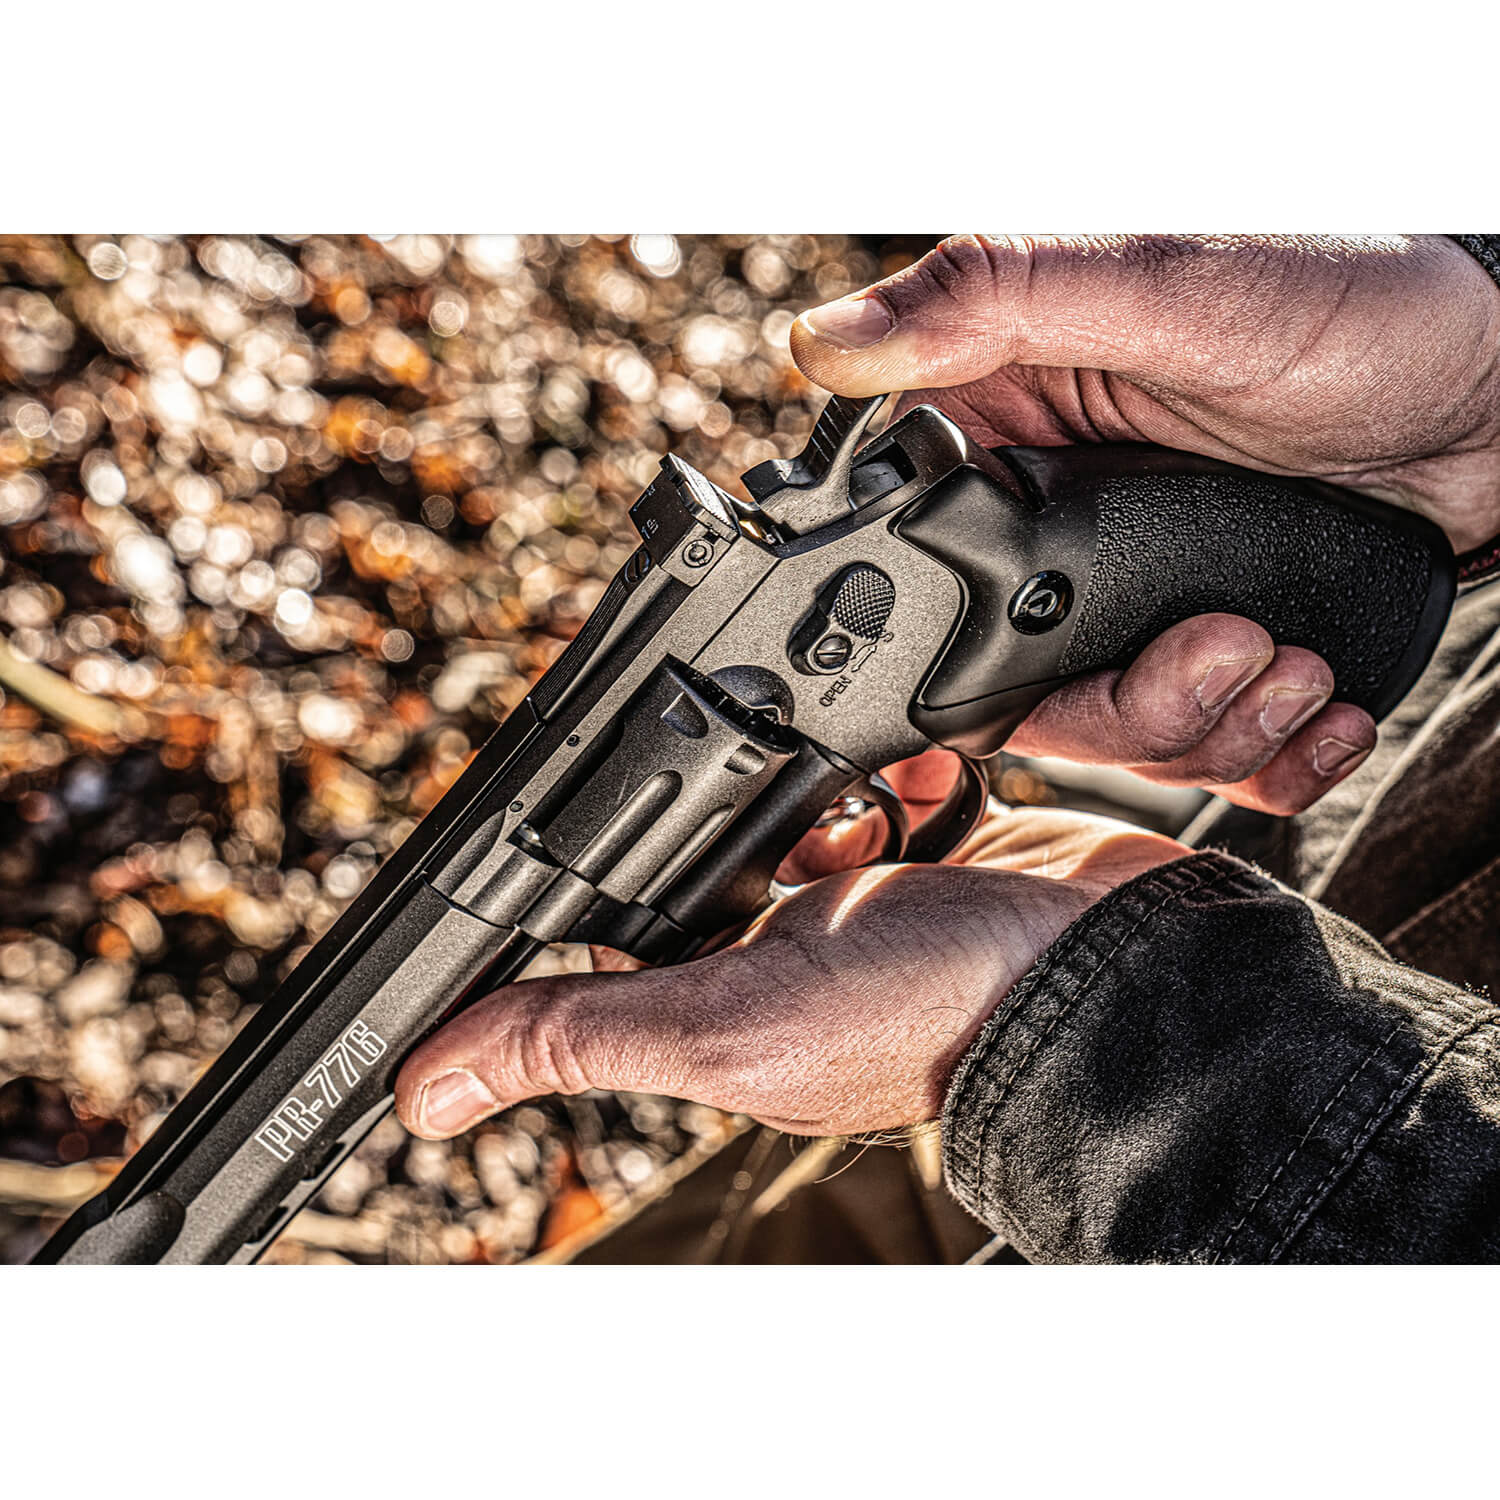 AIRGUN REVIEW - GAMO PR-776 is a great CO2 Pellet Revolver that you NEED in  your Collection - Airgun101